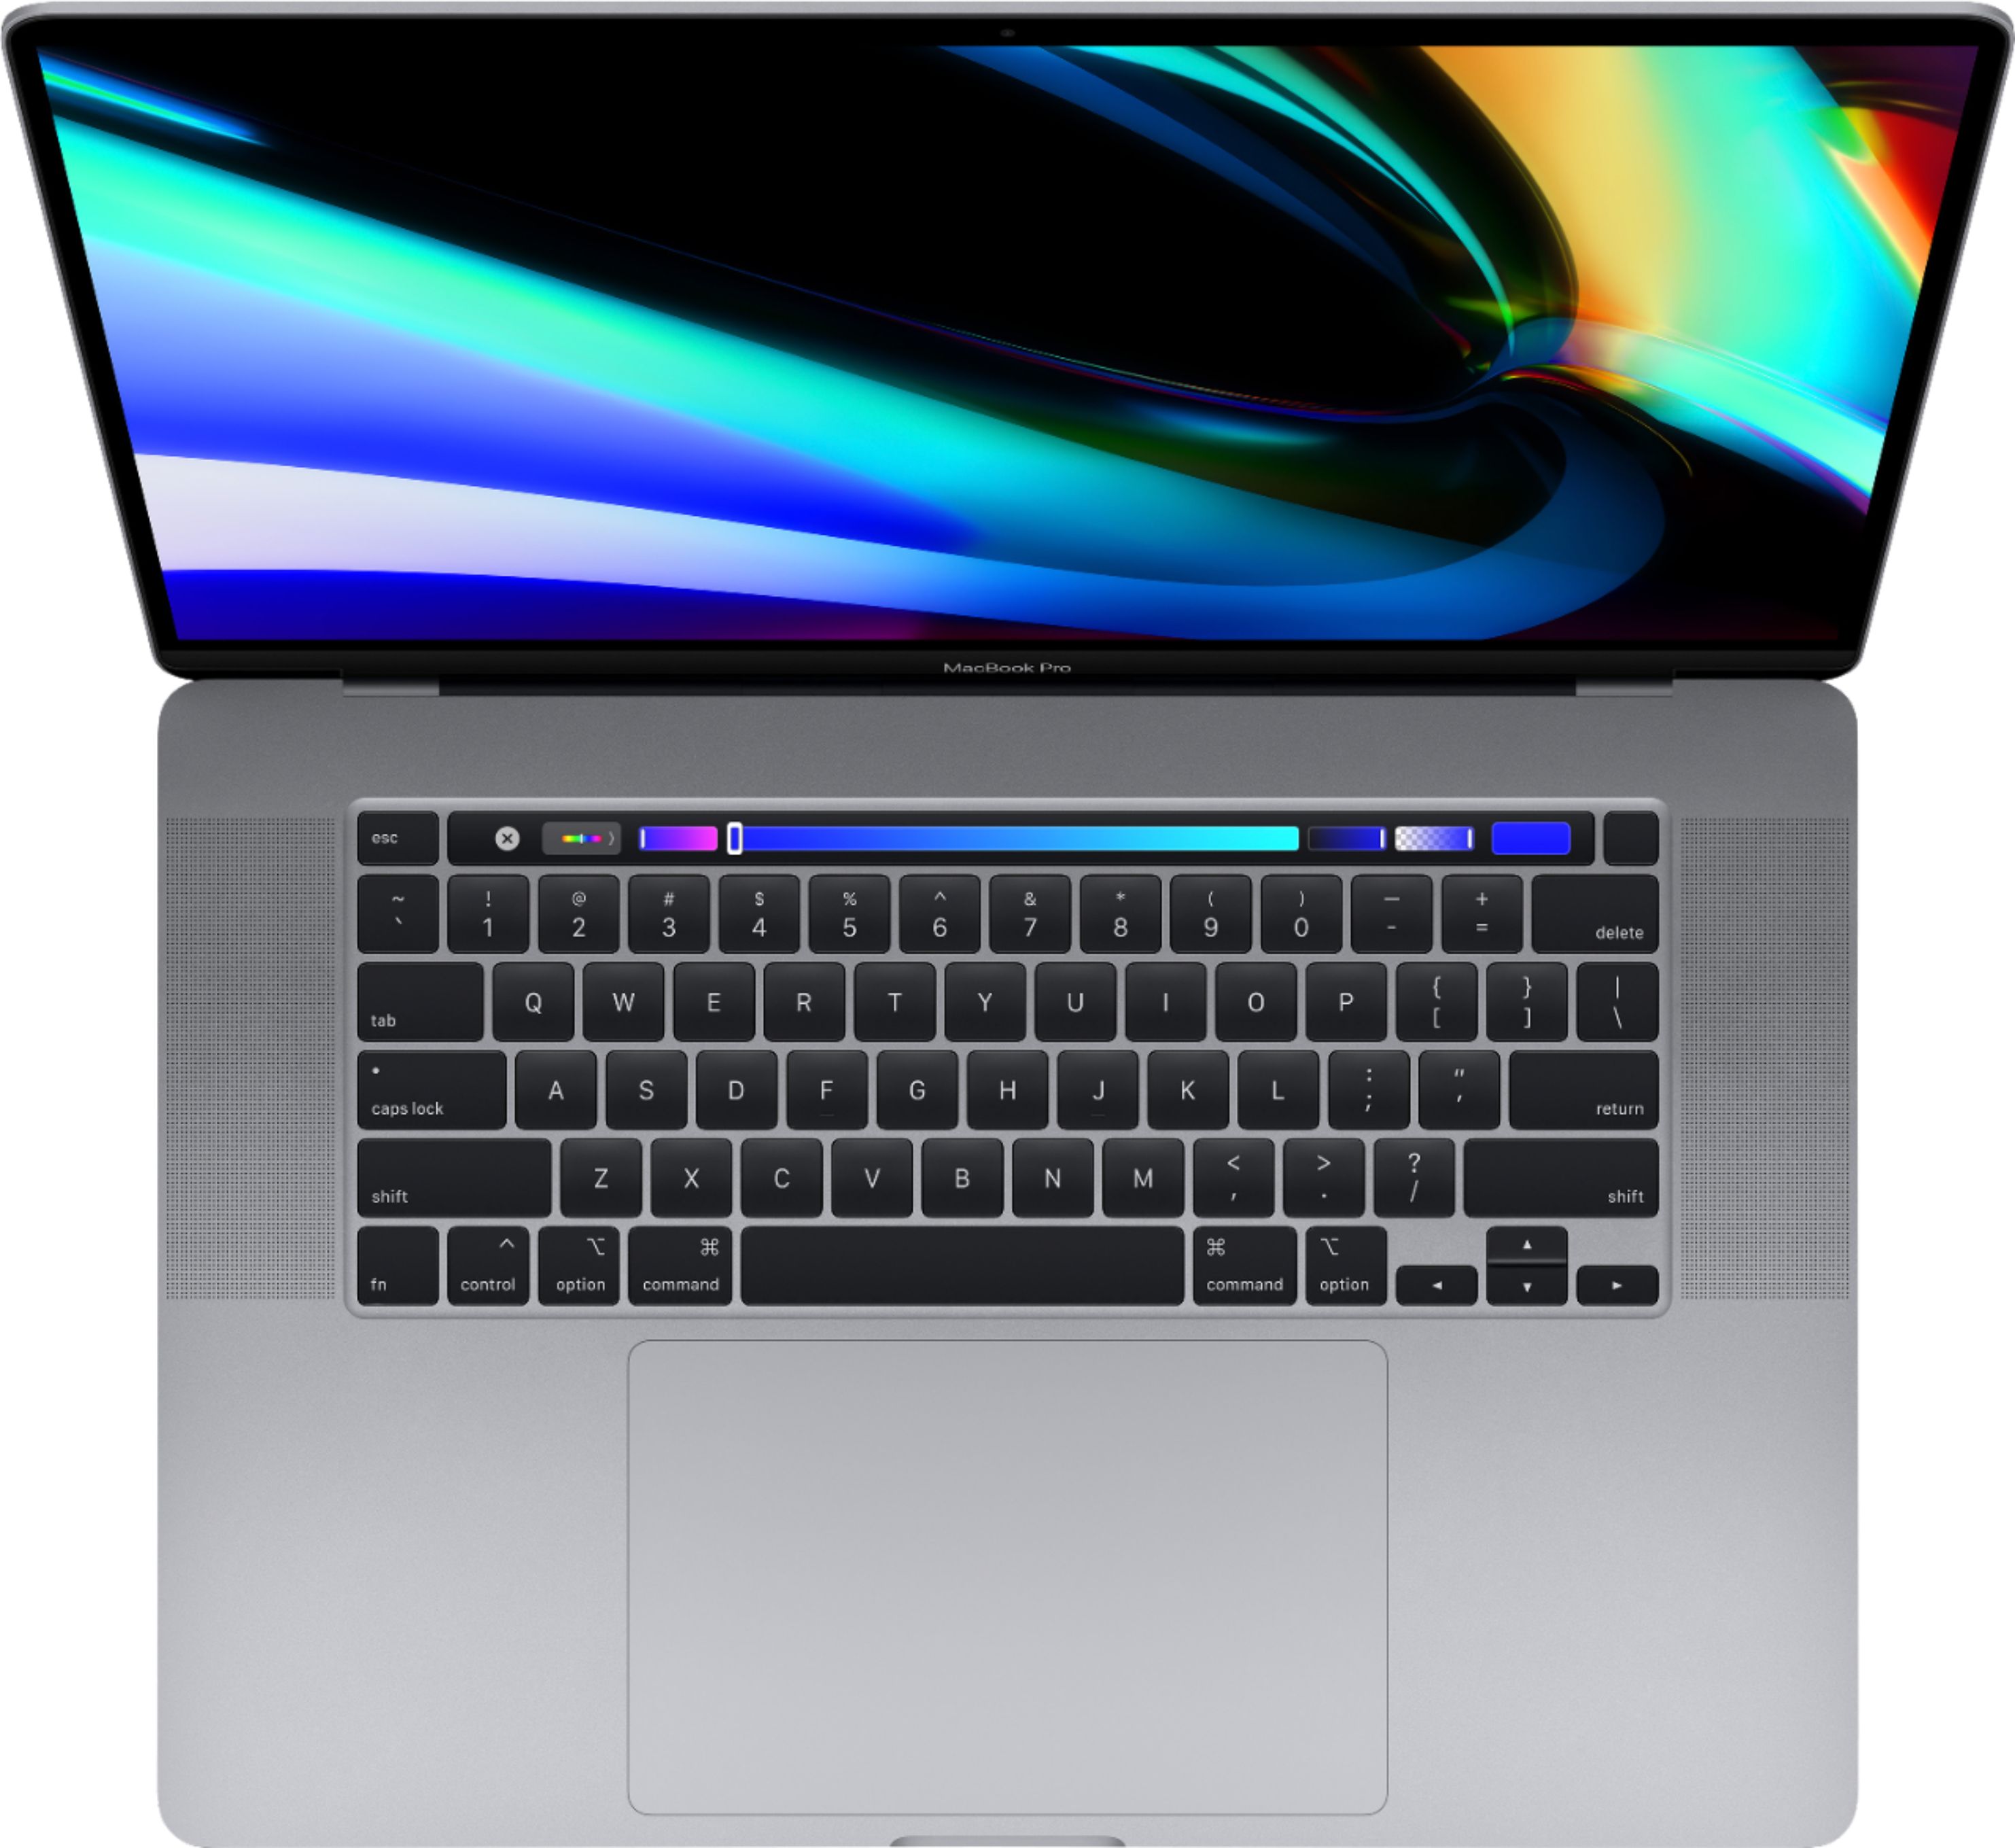 Zoom out on Alt View Zoom 11. Apple - MacBook Pro - 16" Display with Touch Bar - Intel Core i7 - 16GB Memory - AMD Radeon Pro 5300M - 512GB SSD - Space Gray.